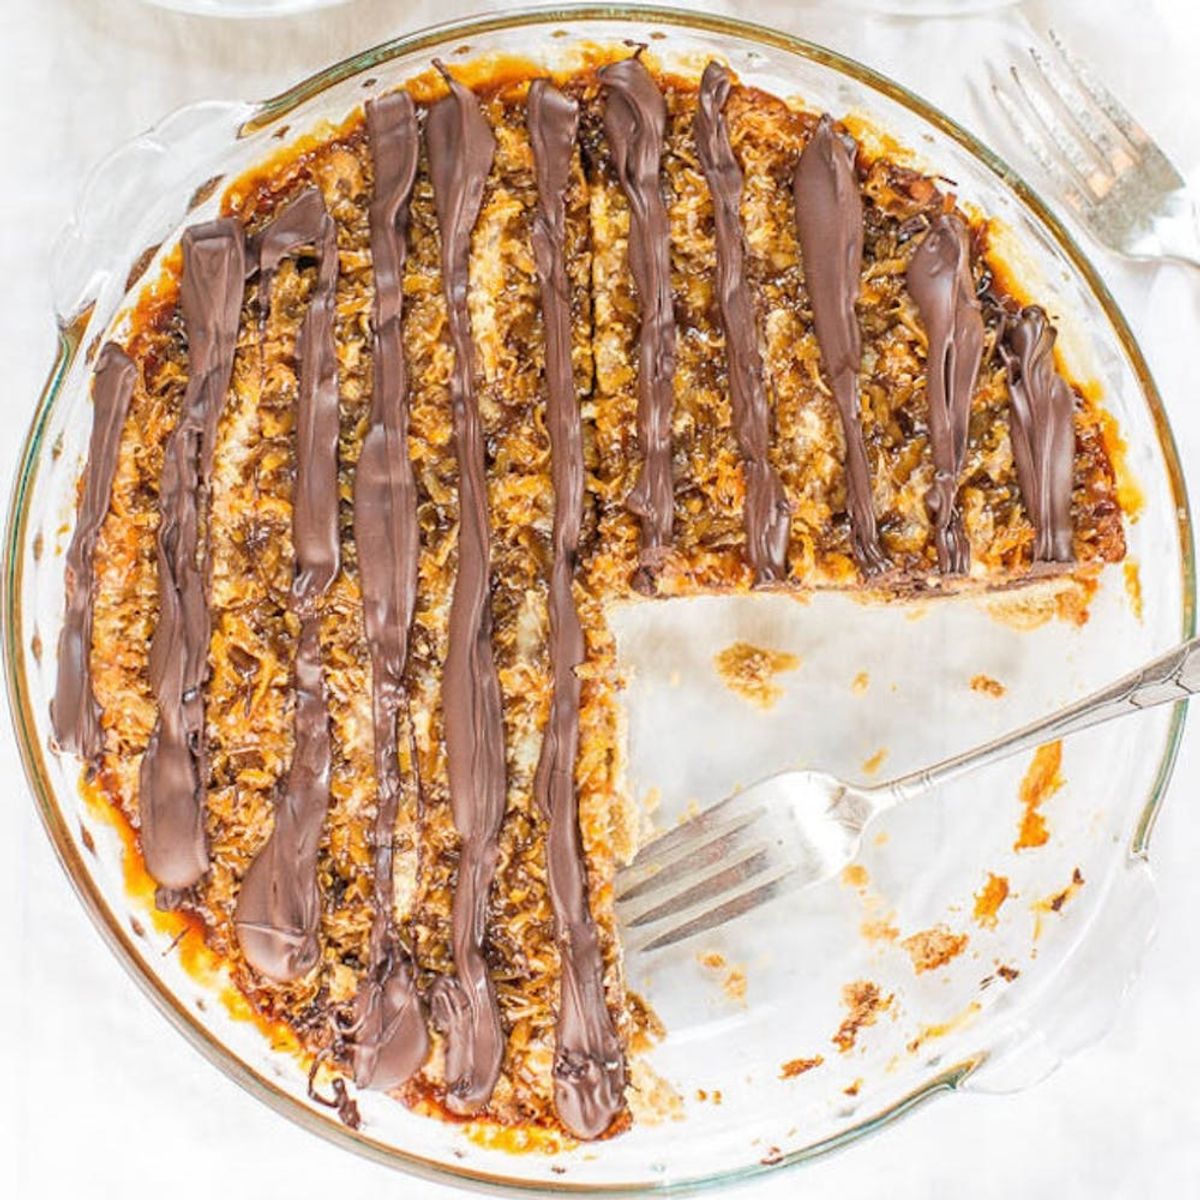 14 Cookie Cake Recipes to Make This Weekend